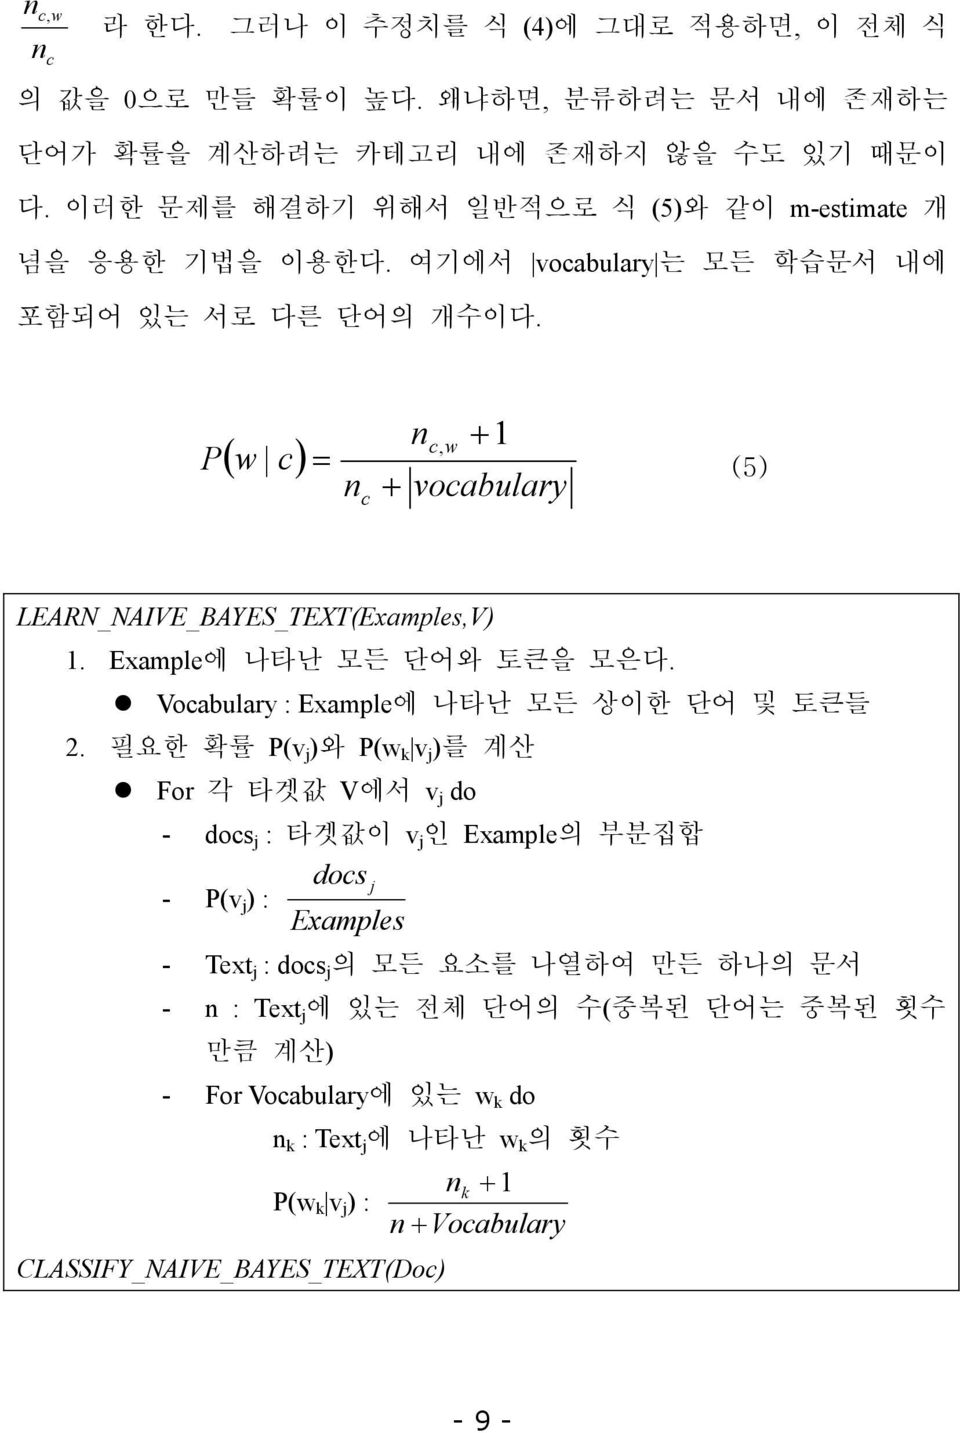 P ( w c) = n c + n c, w + 1 vocabulary (5) LEARN_NAIVE_BAYES_TEXT(Examples,V) 1. Example에 나타난 모든 단어와 토큰을 모은다. Vocabulary : Example에 나타난 모든 상이한 단어 및 토큰들 2.